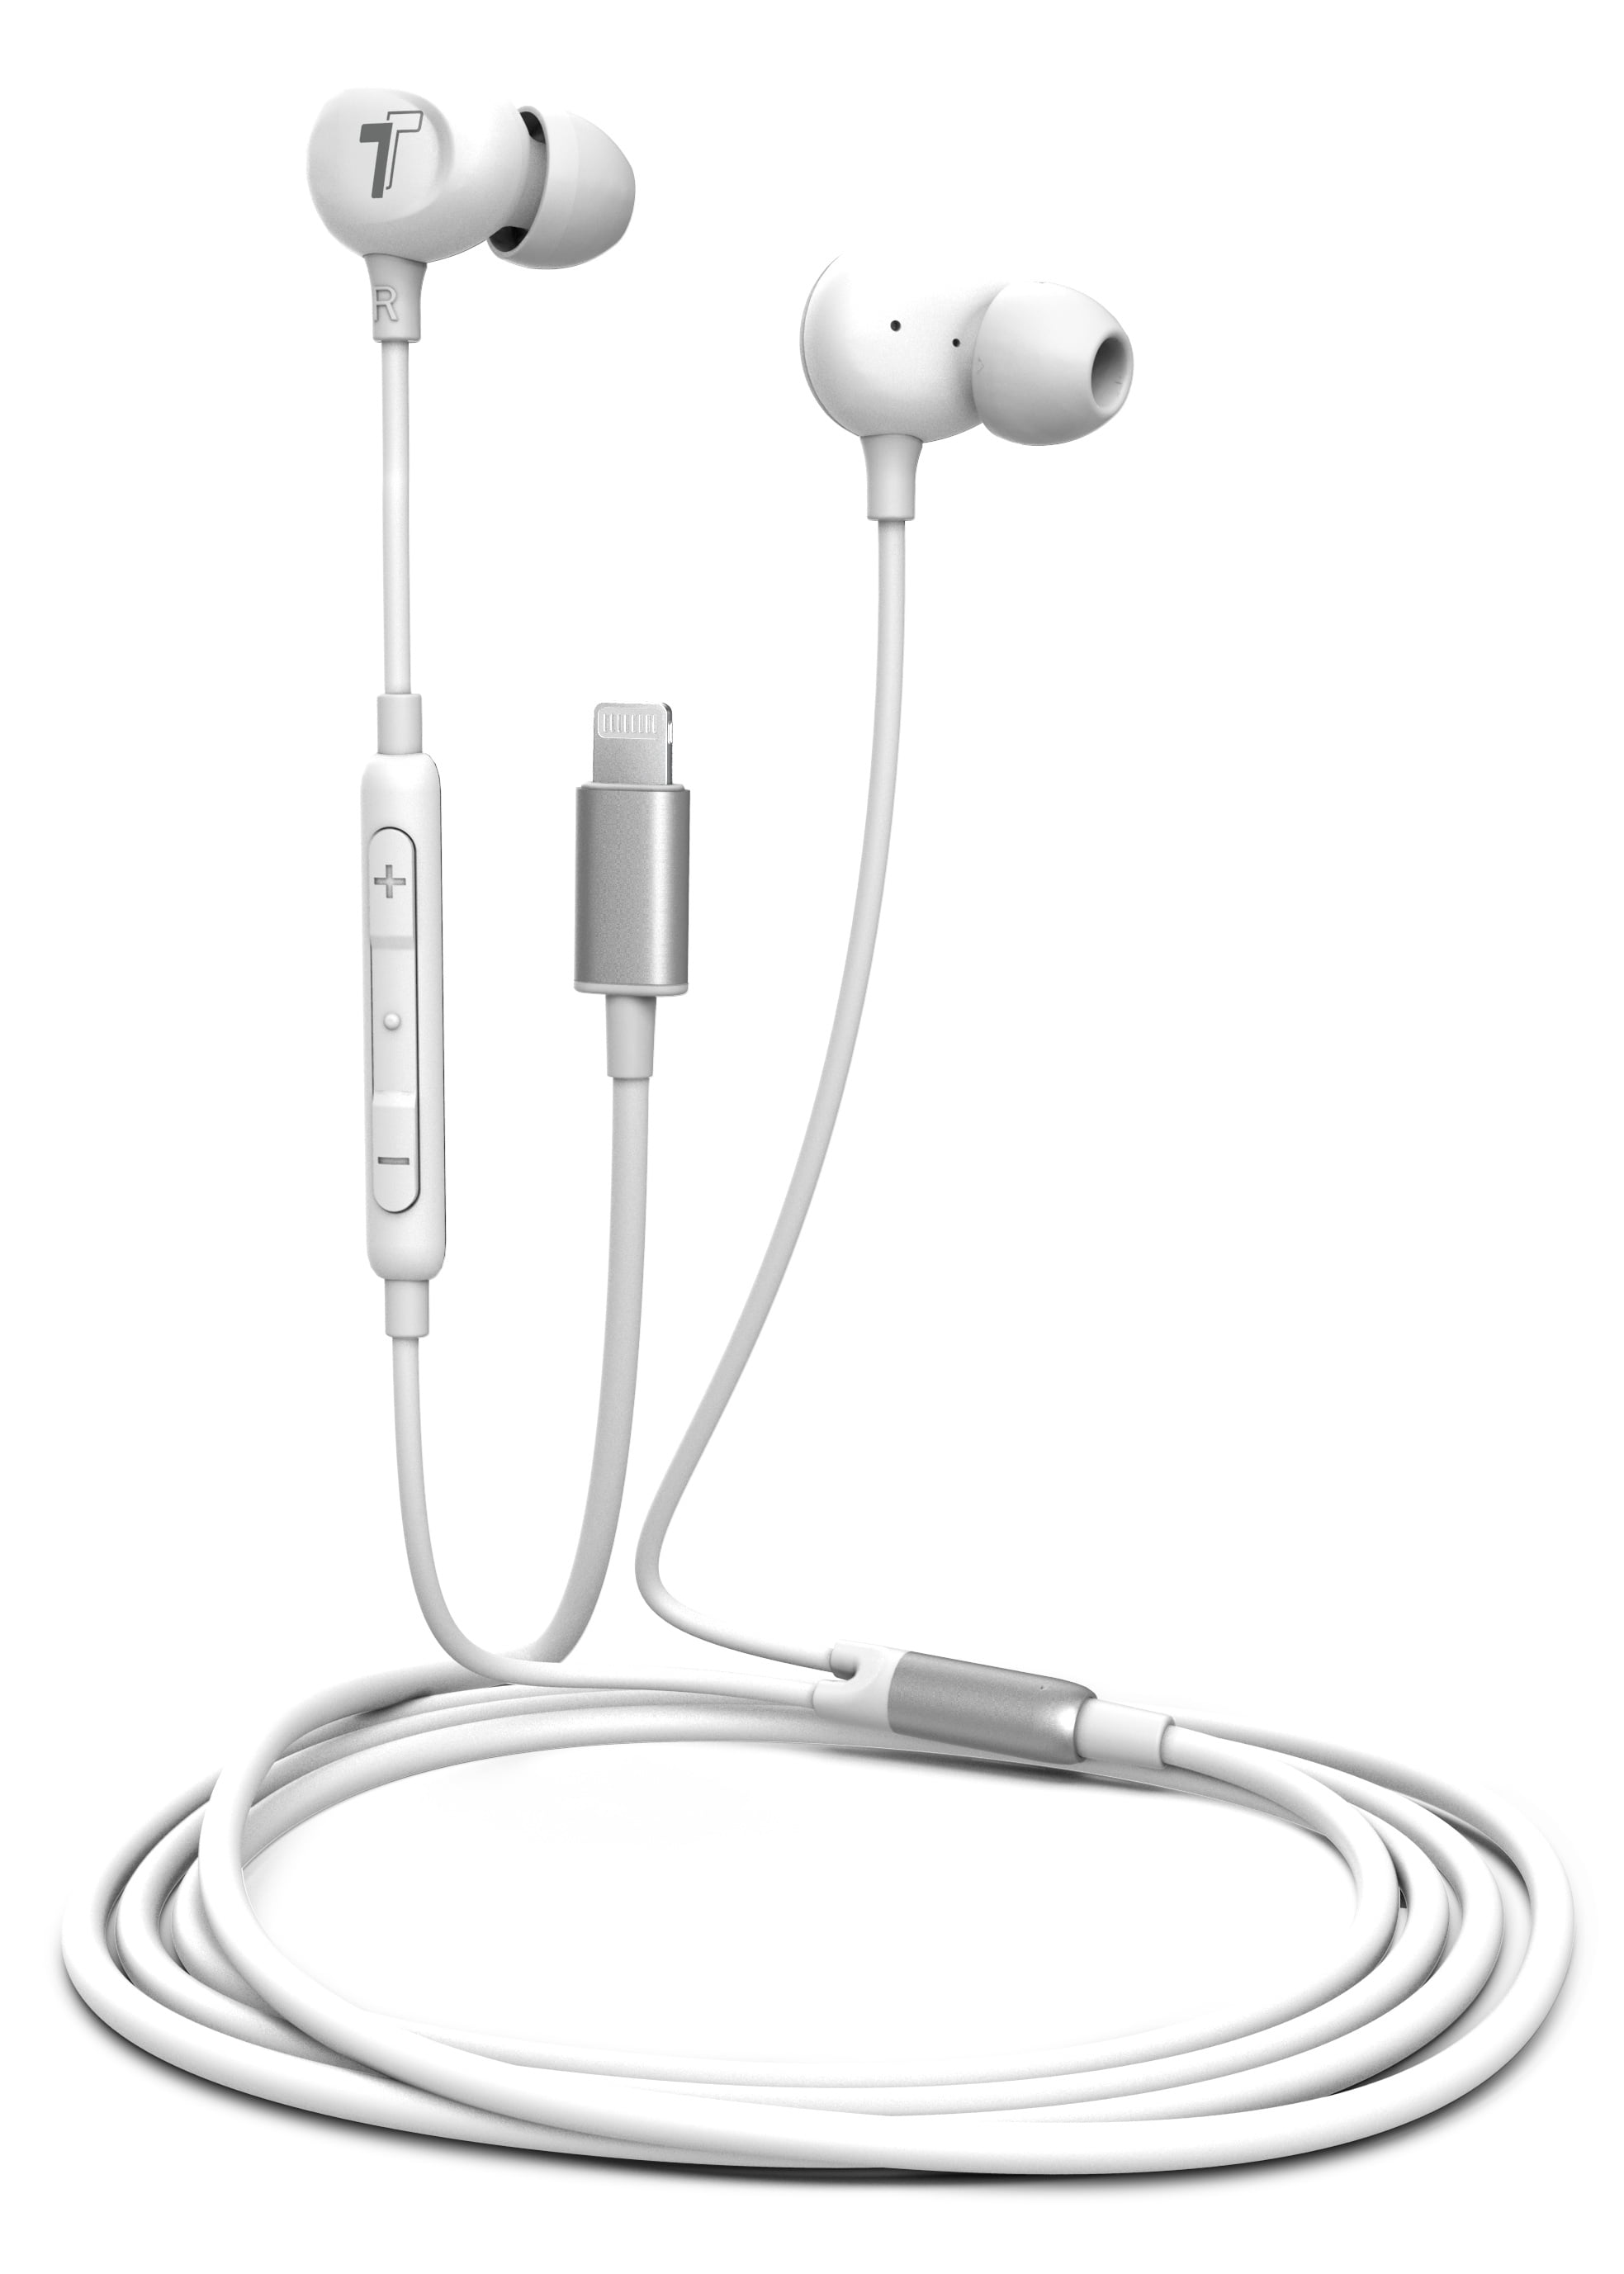 Apple MFi Certified iPhone Headphones Compatible with iPhone 12/11/X/7 8/7 8Plus Built-in Microphone/Volume Control Compatible with All iOS Systems Apple Earbuds Headphones with Lightning Connector, 